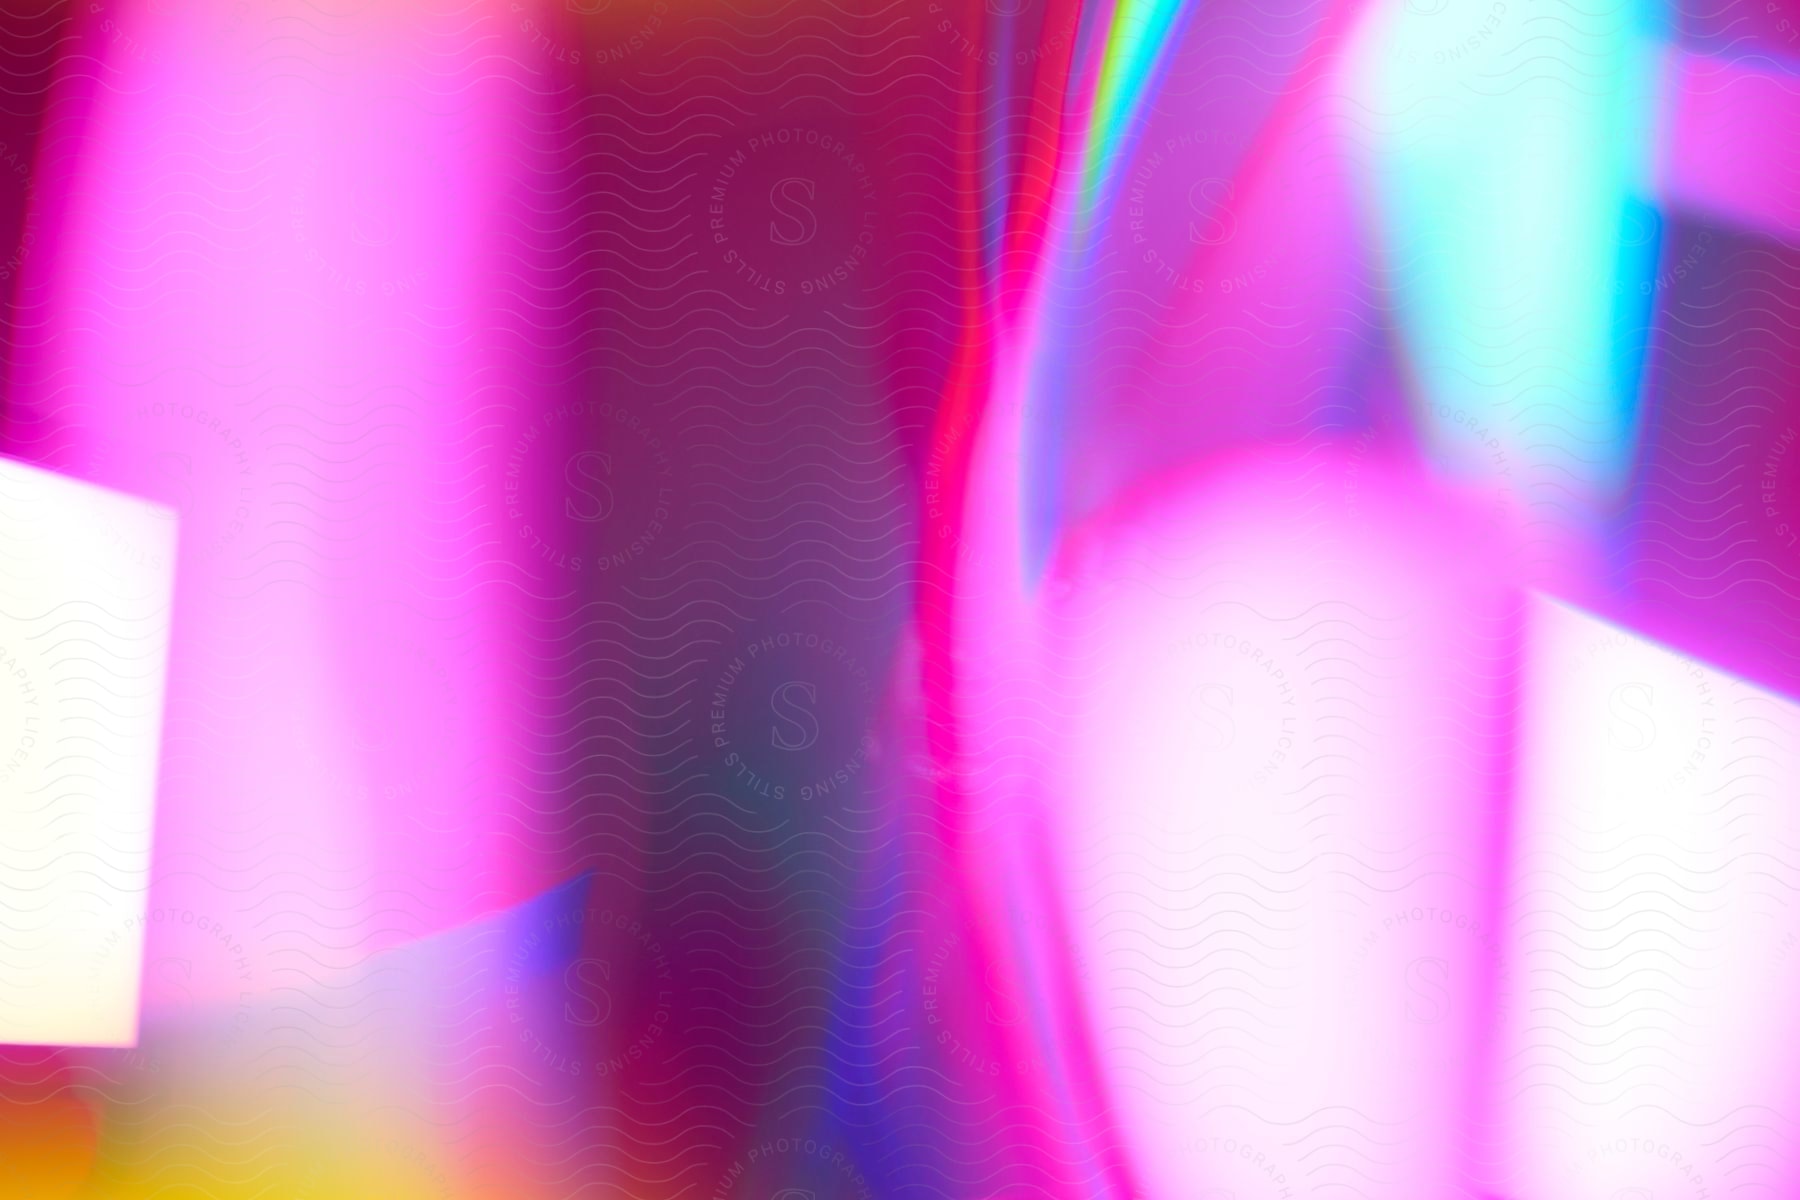 A blurry and abstract image with a combination of pink, blue, and white lights.